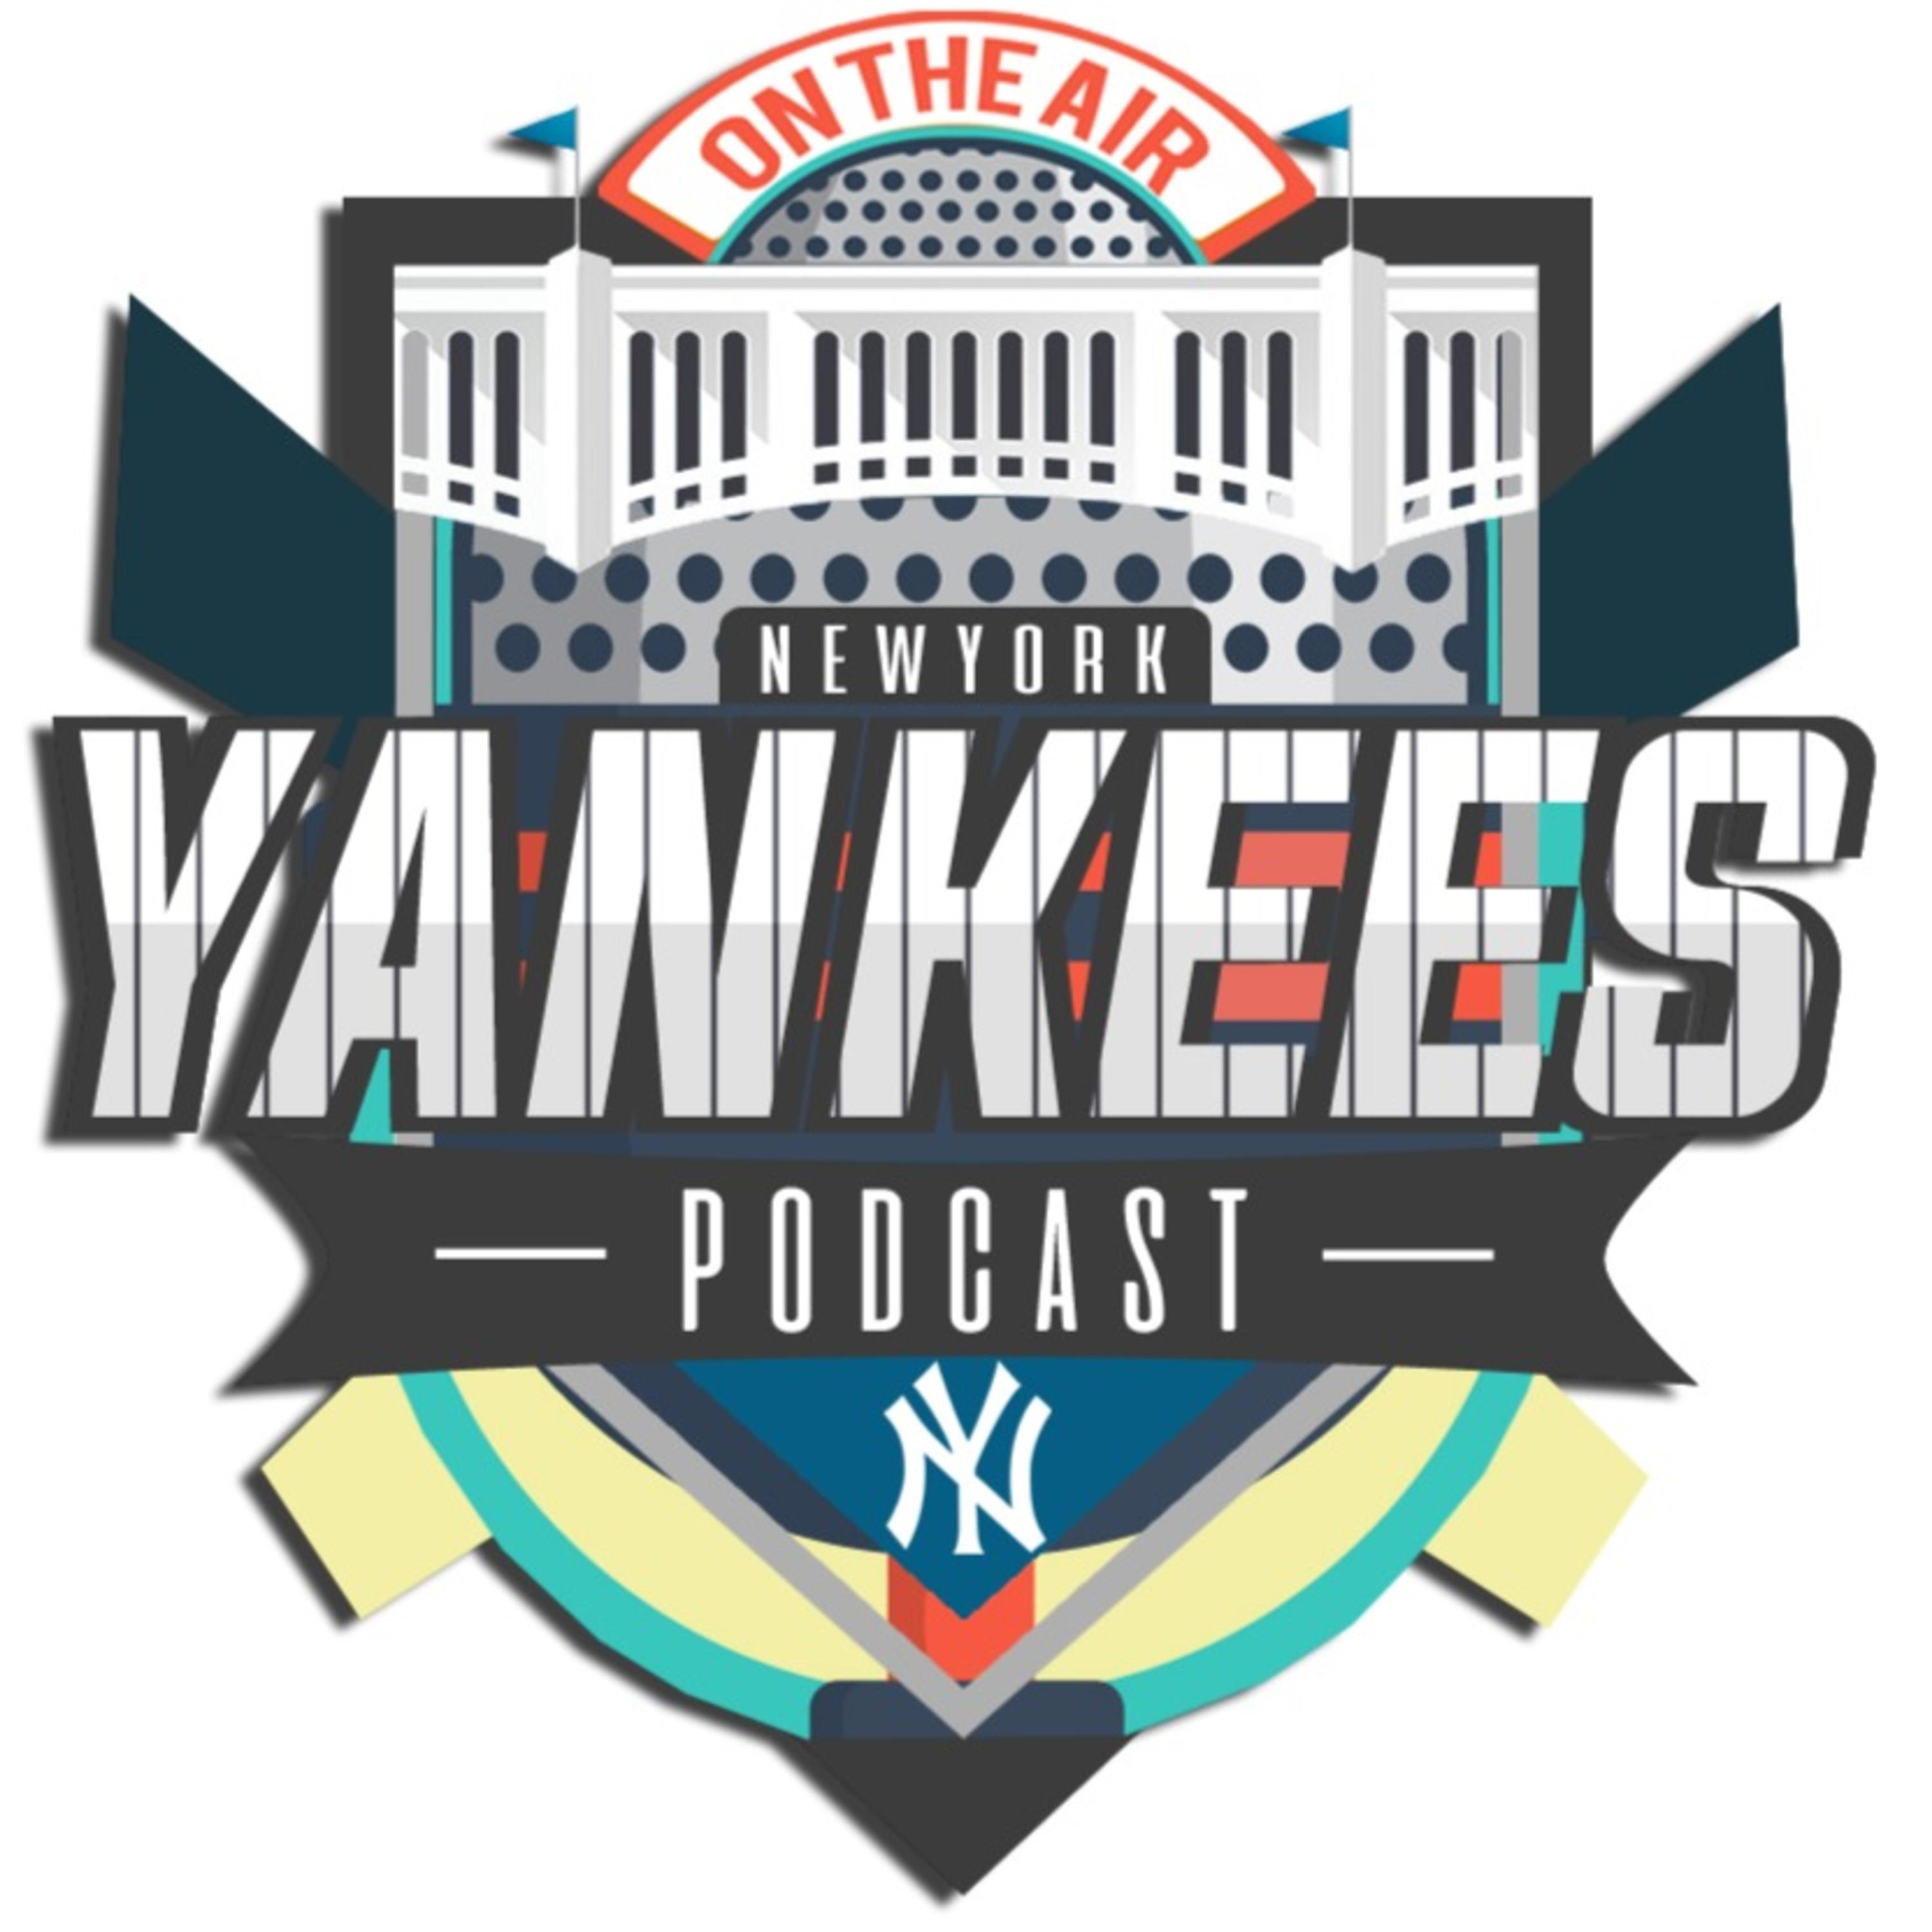 New York Yankees Hungary Podcast - Bé x DS! x Mike - S02EP06